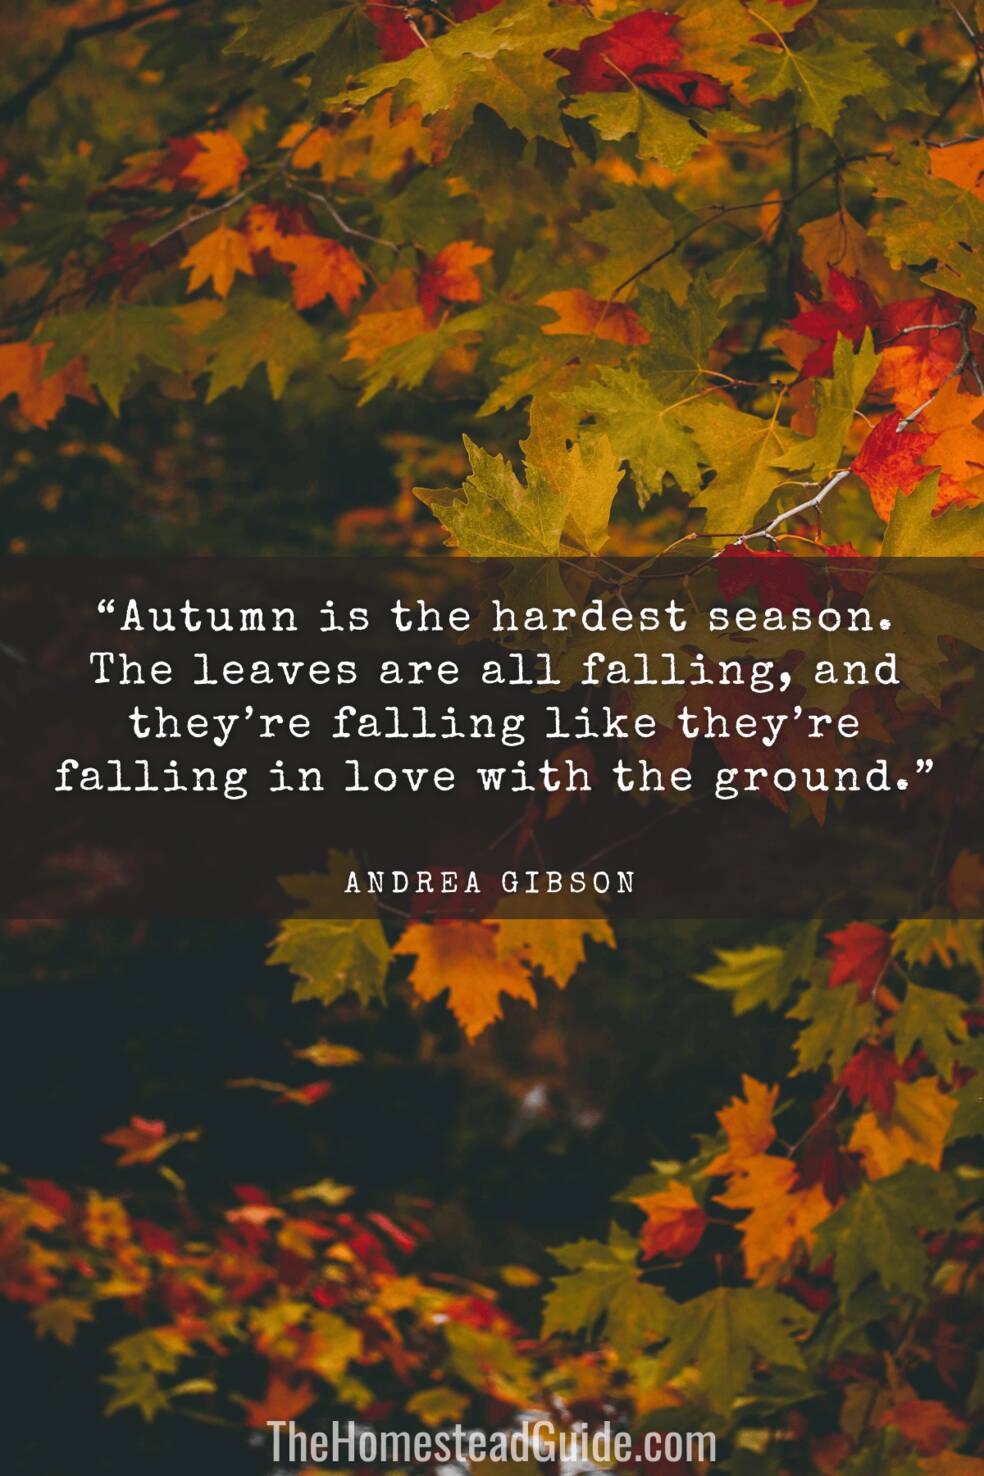 Autumn is the hardest season. The leaves are all falling, and theyre falling like theyre falling in love with the ground.